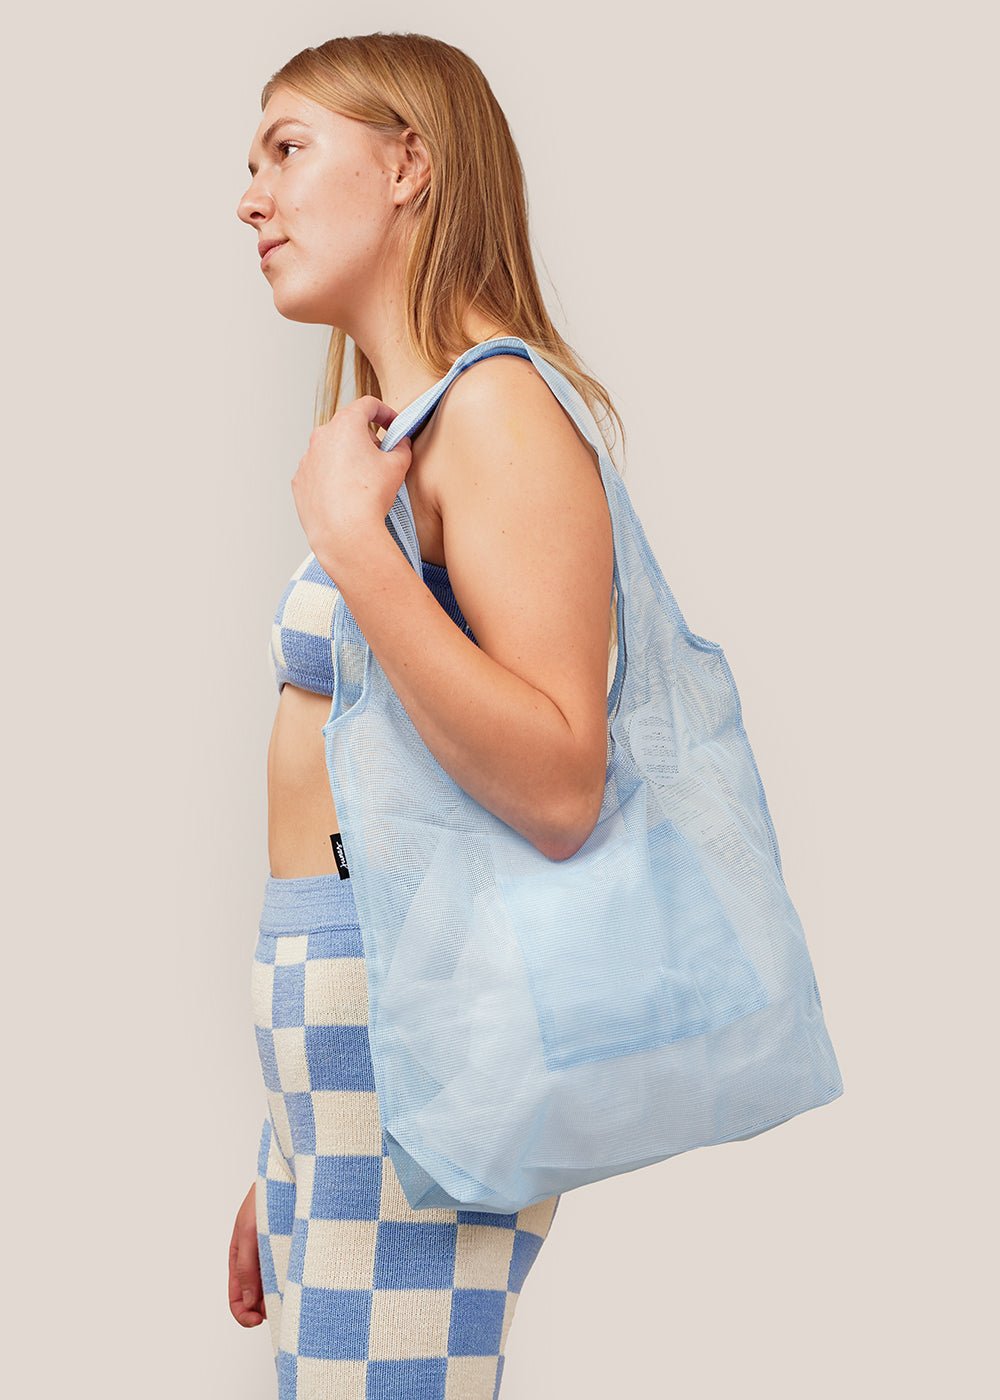 Junes Pale Blue Everyday Tote - New Classics Studios Sustainable Ethical Fashion Canada